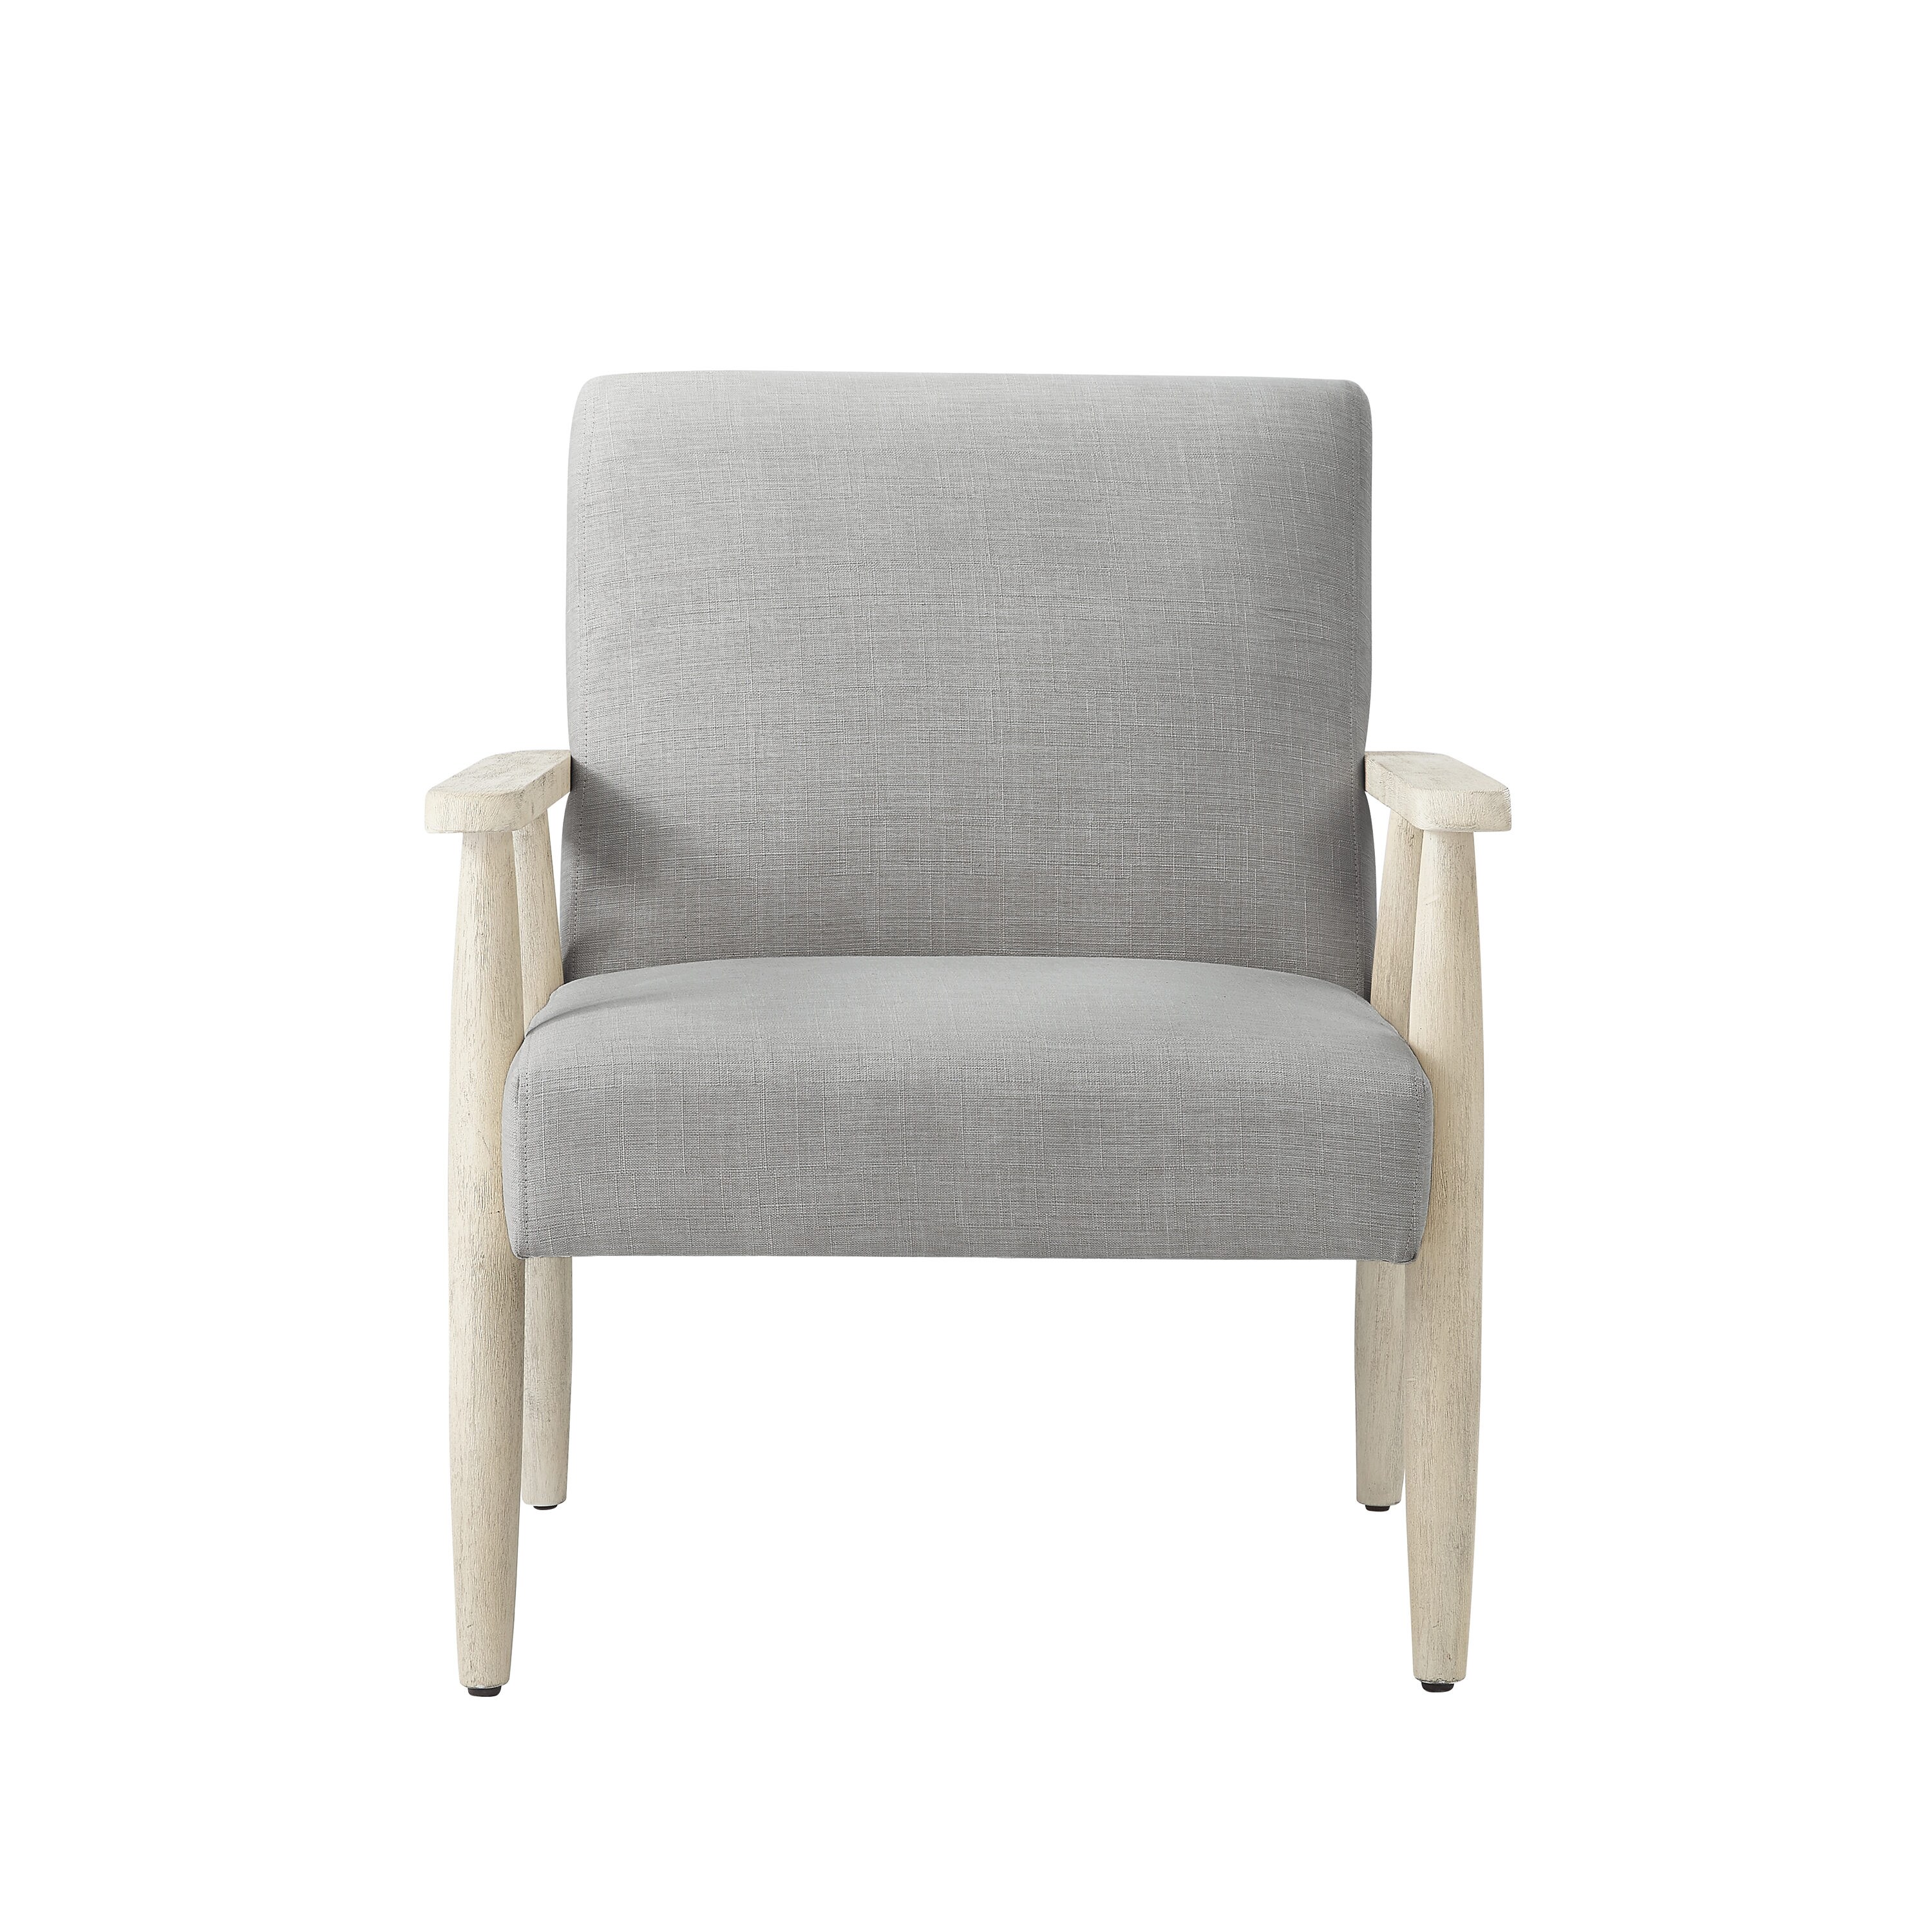 Rustic Manor Midcentury Grey/Cream Linen Accent Chair in the ...